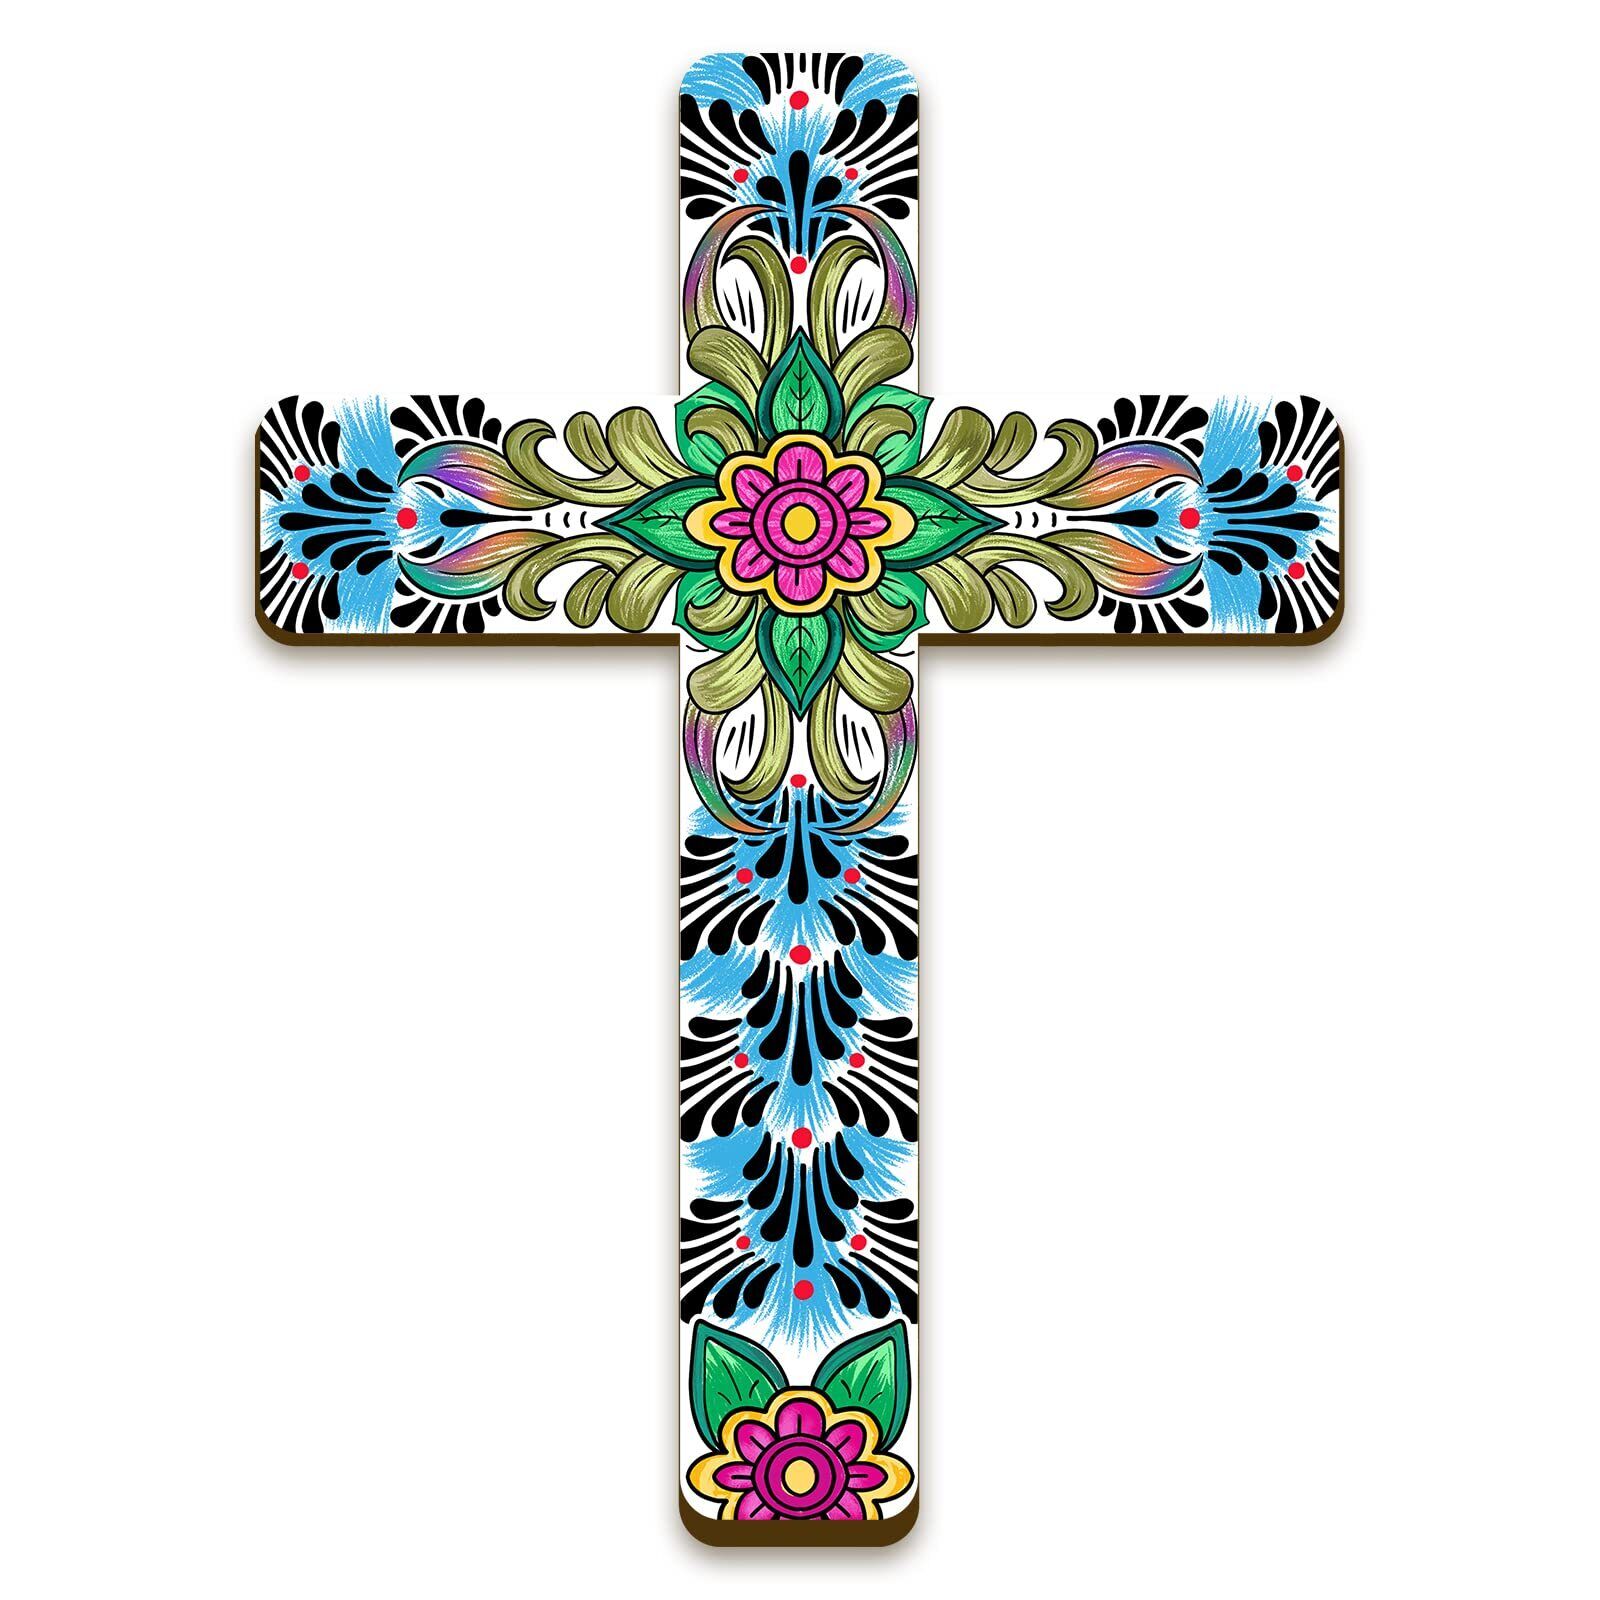 Floral Cross Wall Decor Hand Painted Decorative Inspirational Wooden Cross